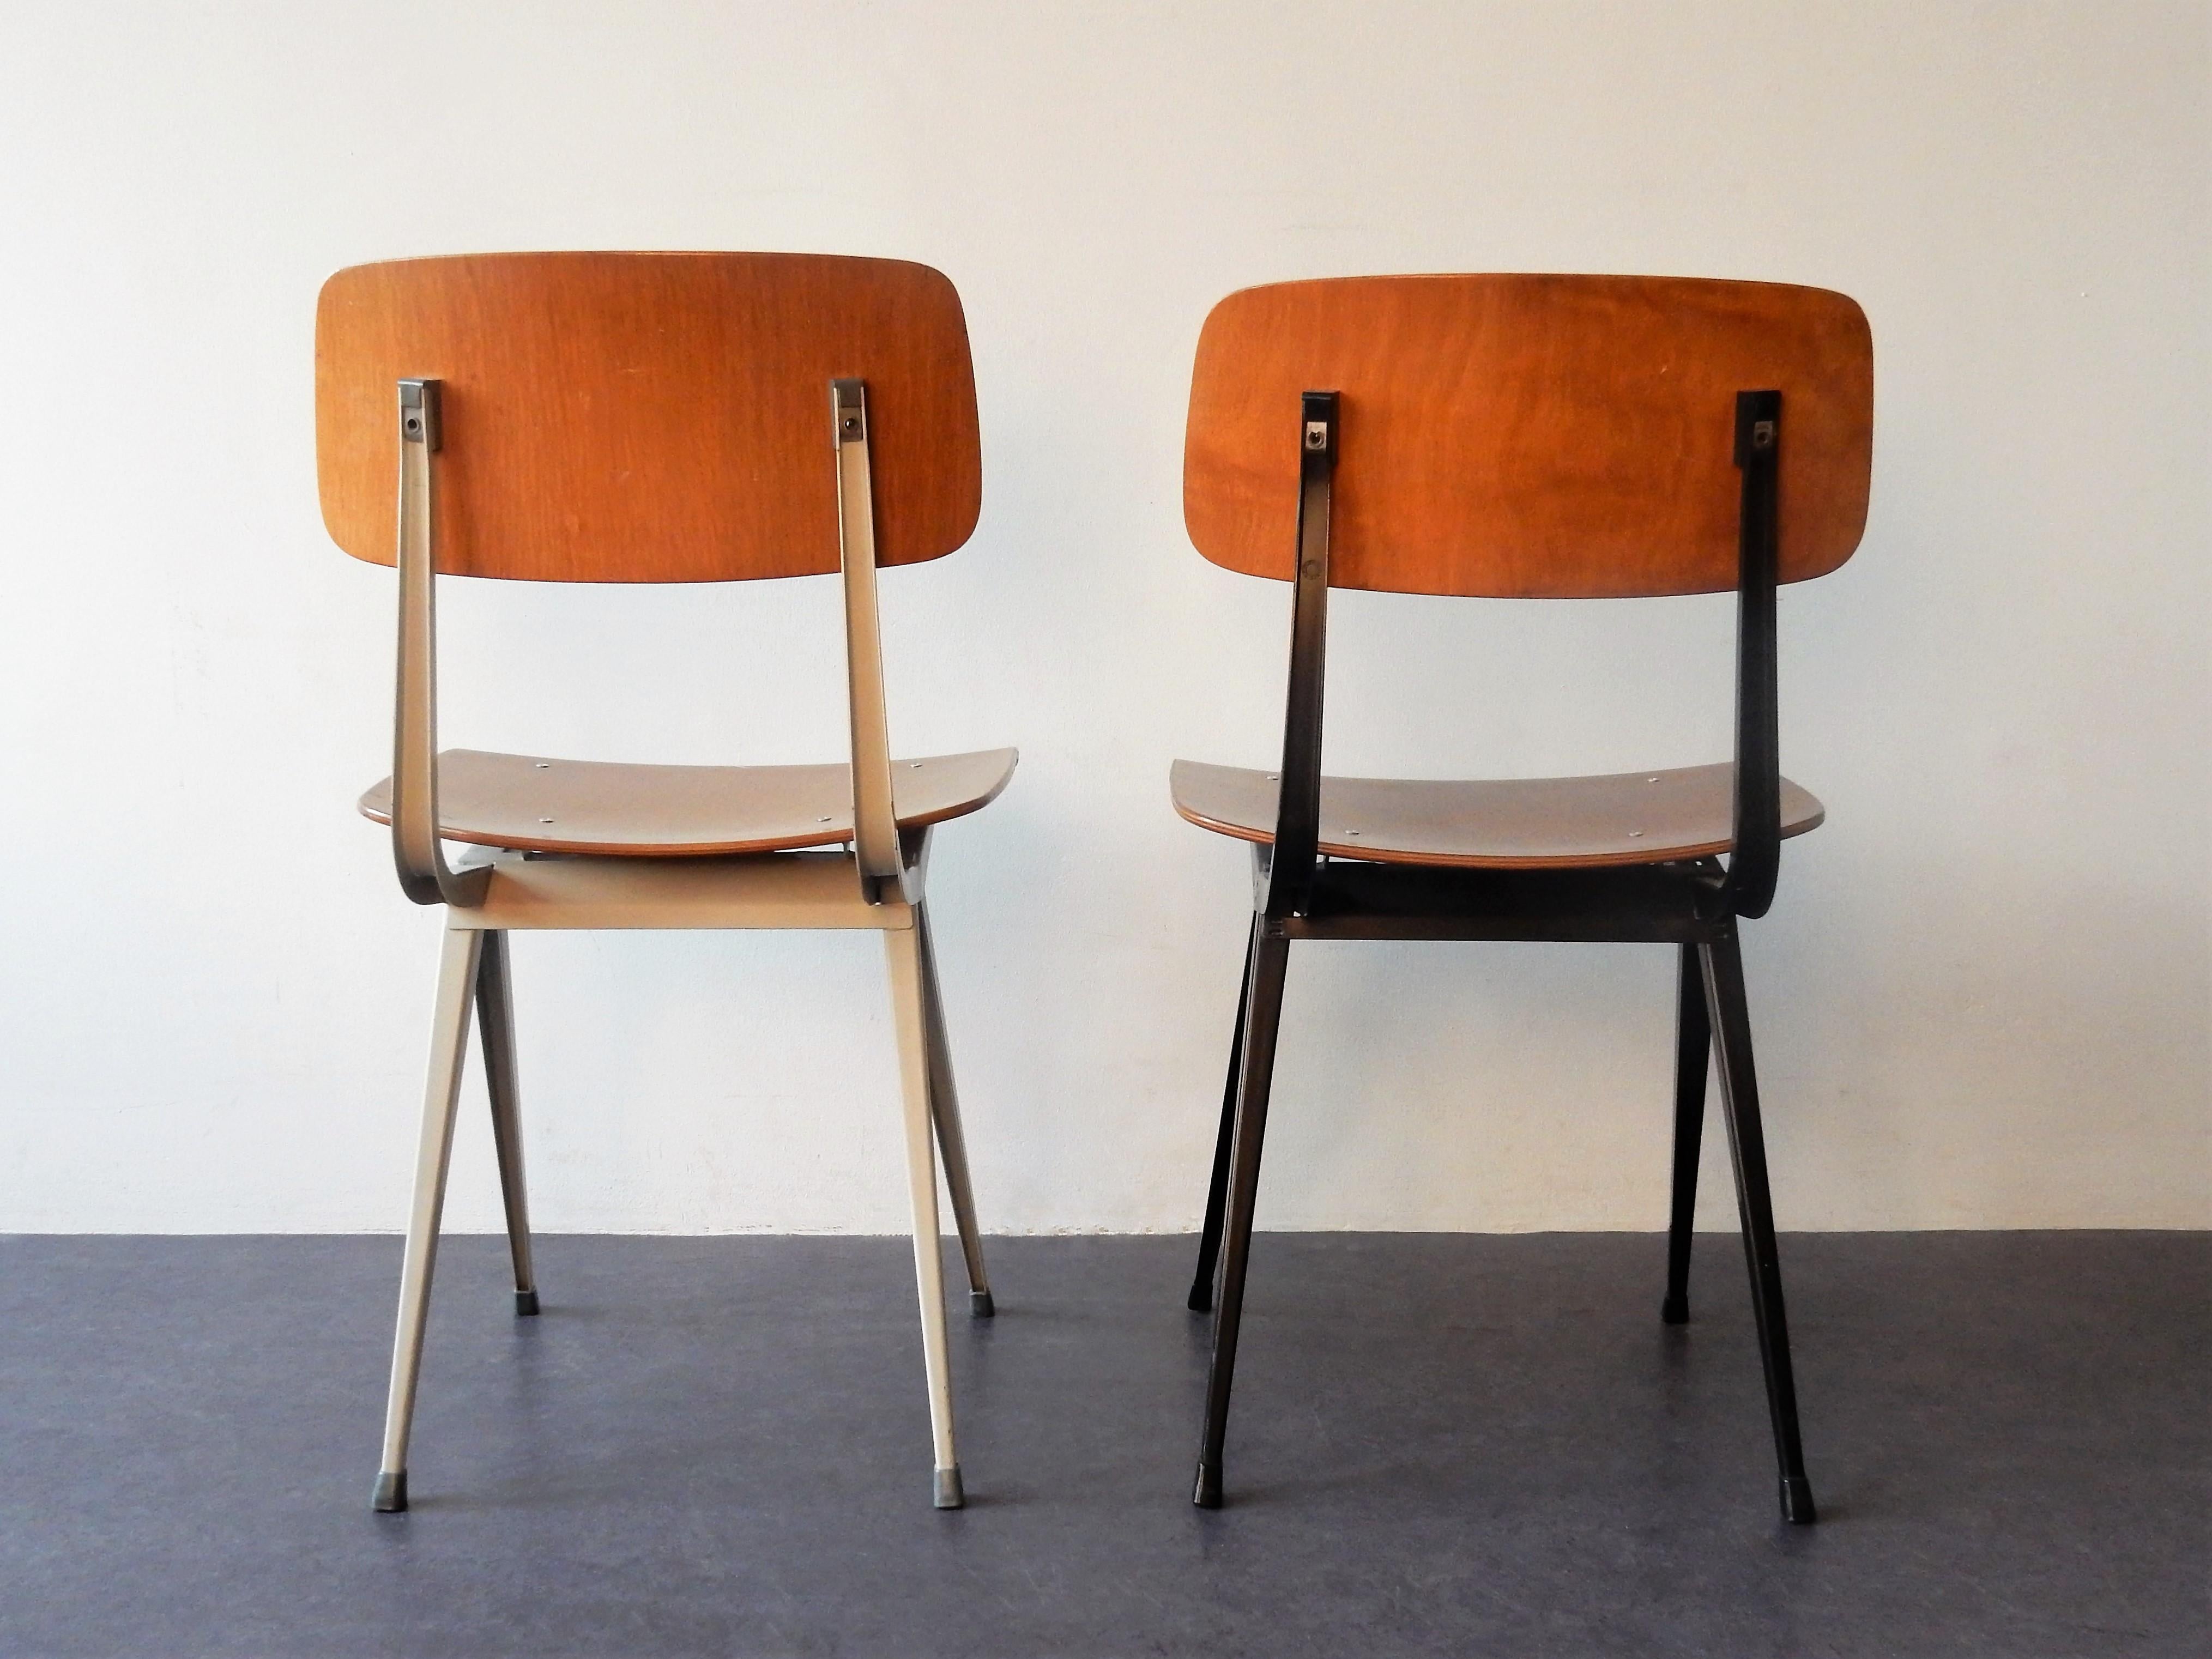 The famous 'Result' chair was designed by Friso Kramer for Ahrend de Cirkel in the 1950s. This model was very common to be seen in larger amounts at schools, canteens and office spaces. We have one with a black frame and one with a grey frame